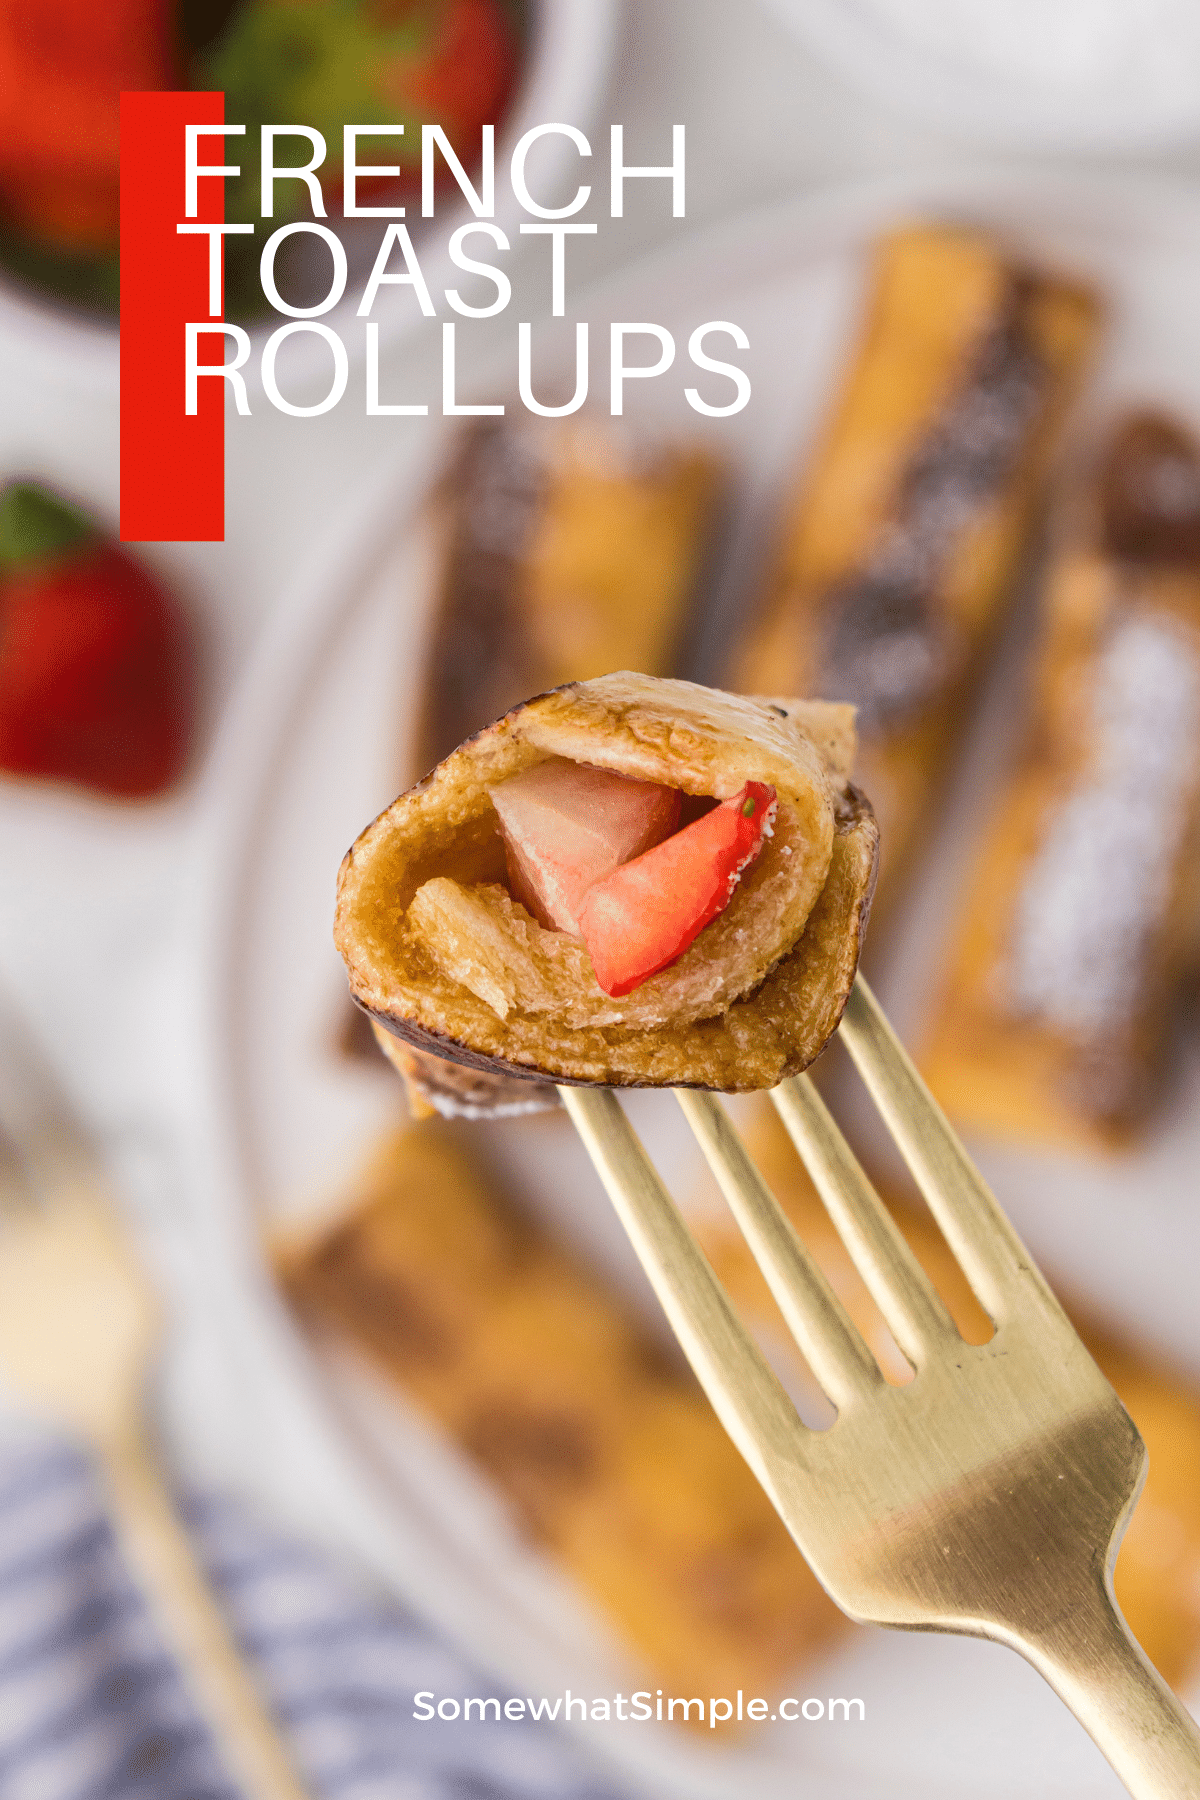 French toast rollups are golden brown on the outside and filled with a warm and gooey cream cheese and sweet strawberry filling. Everyone loves this twist on the classic French toast, whether plain or finished with a dusting of powdered sugar and a drizzle of maple syrup! via @somewhatsimple